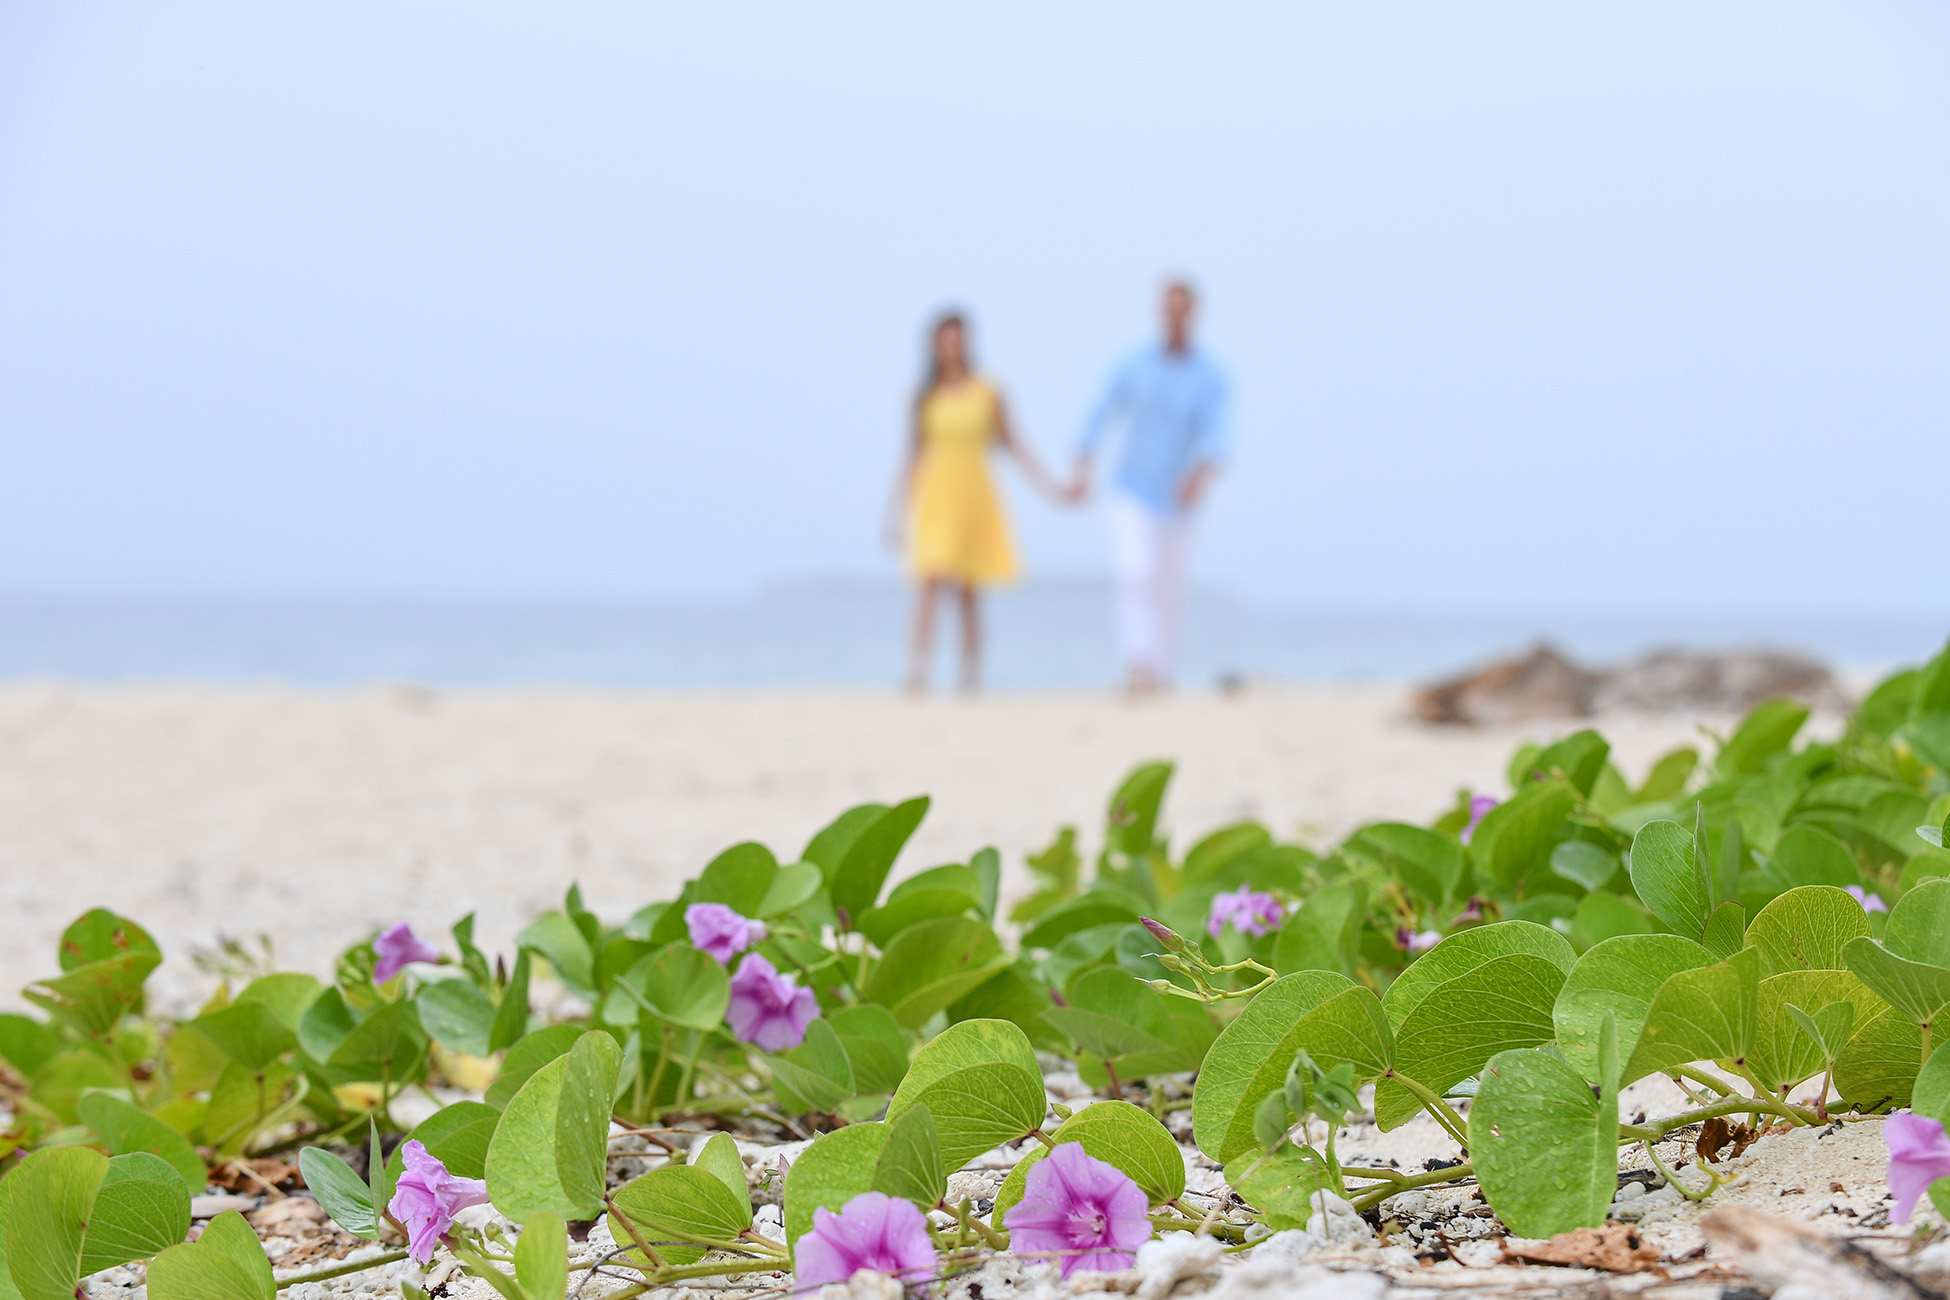 The beach morning glory flower in the foreground with the engaged couple in the background